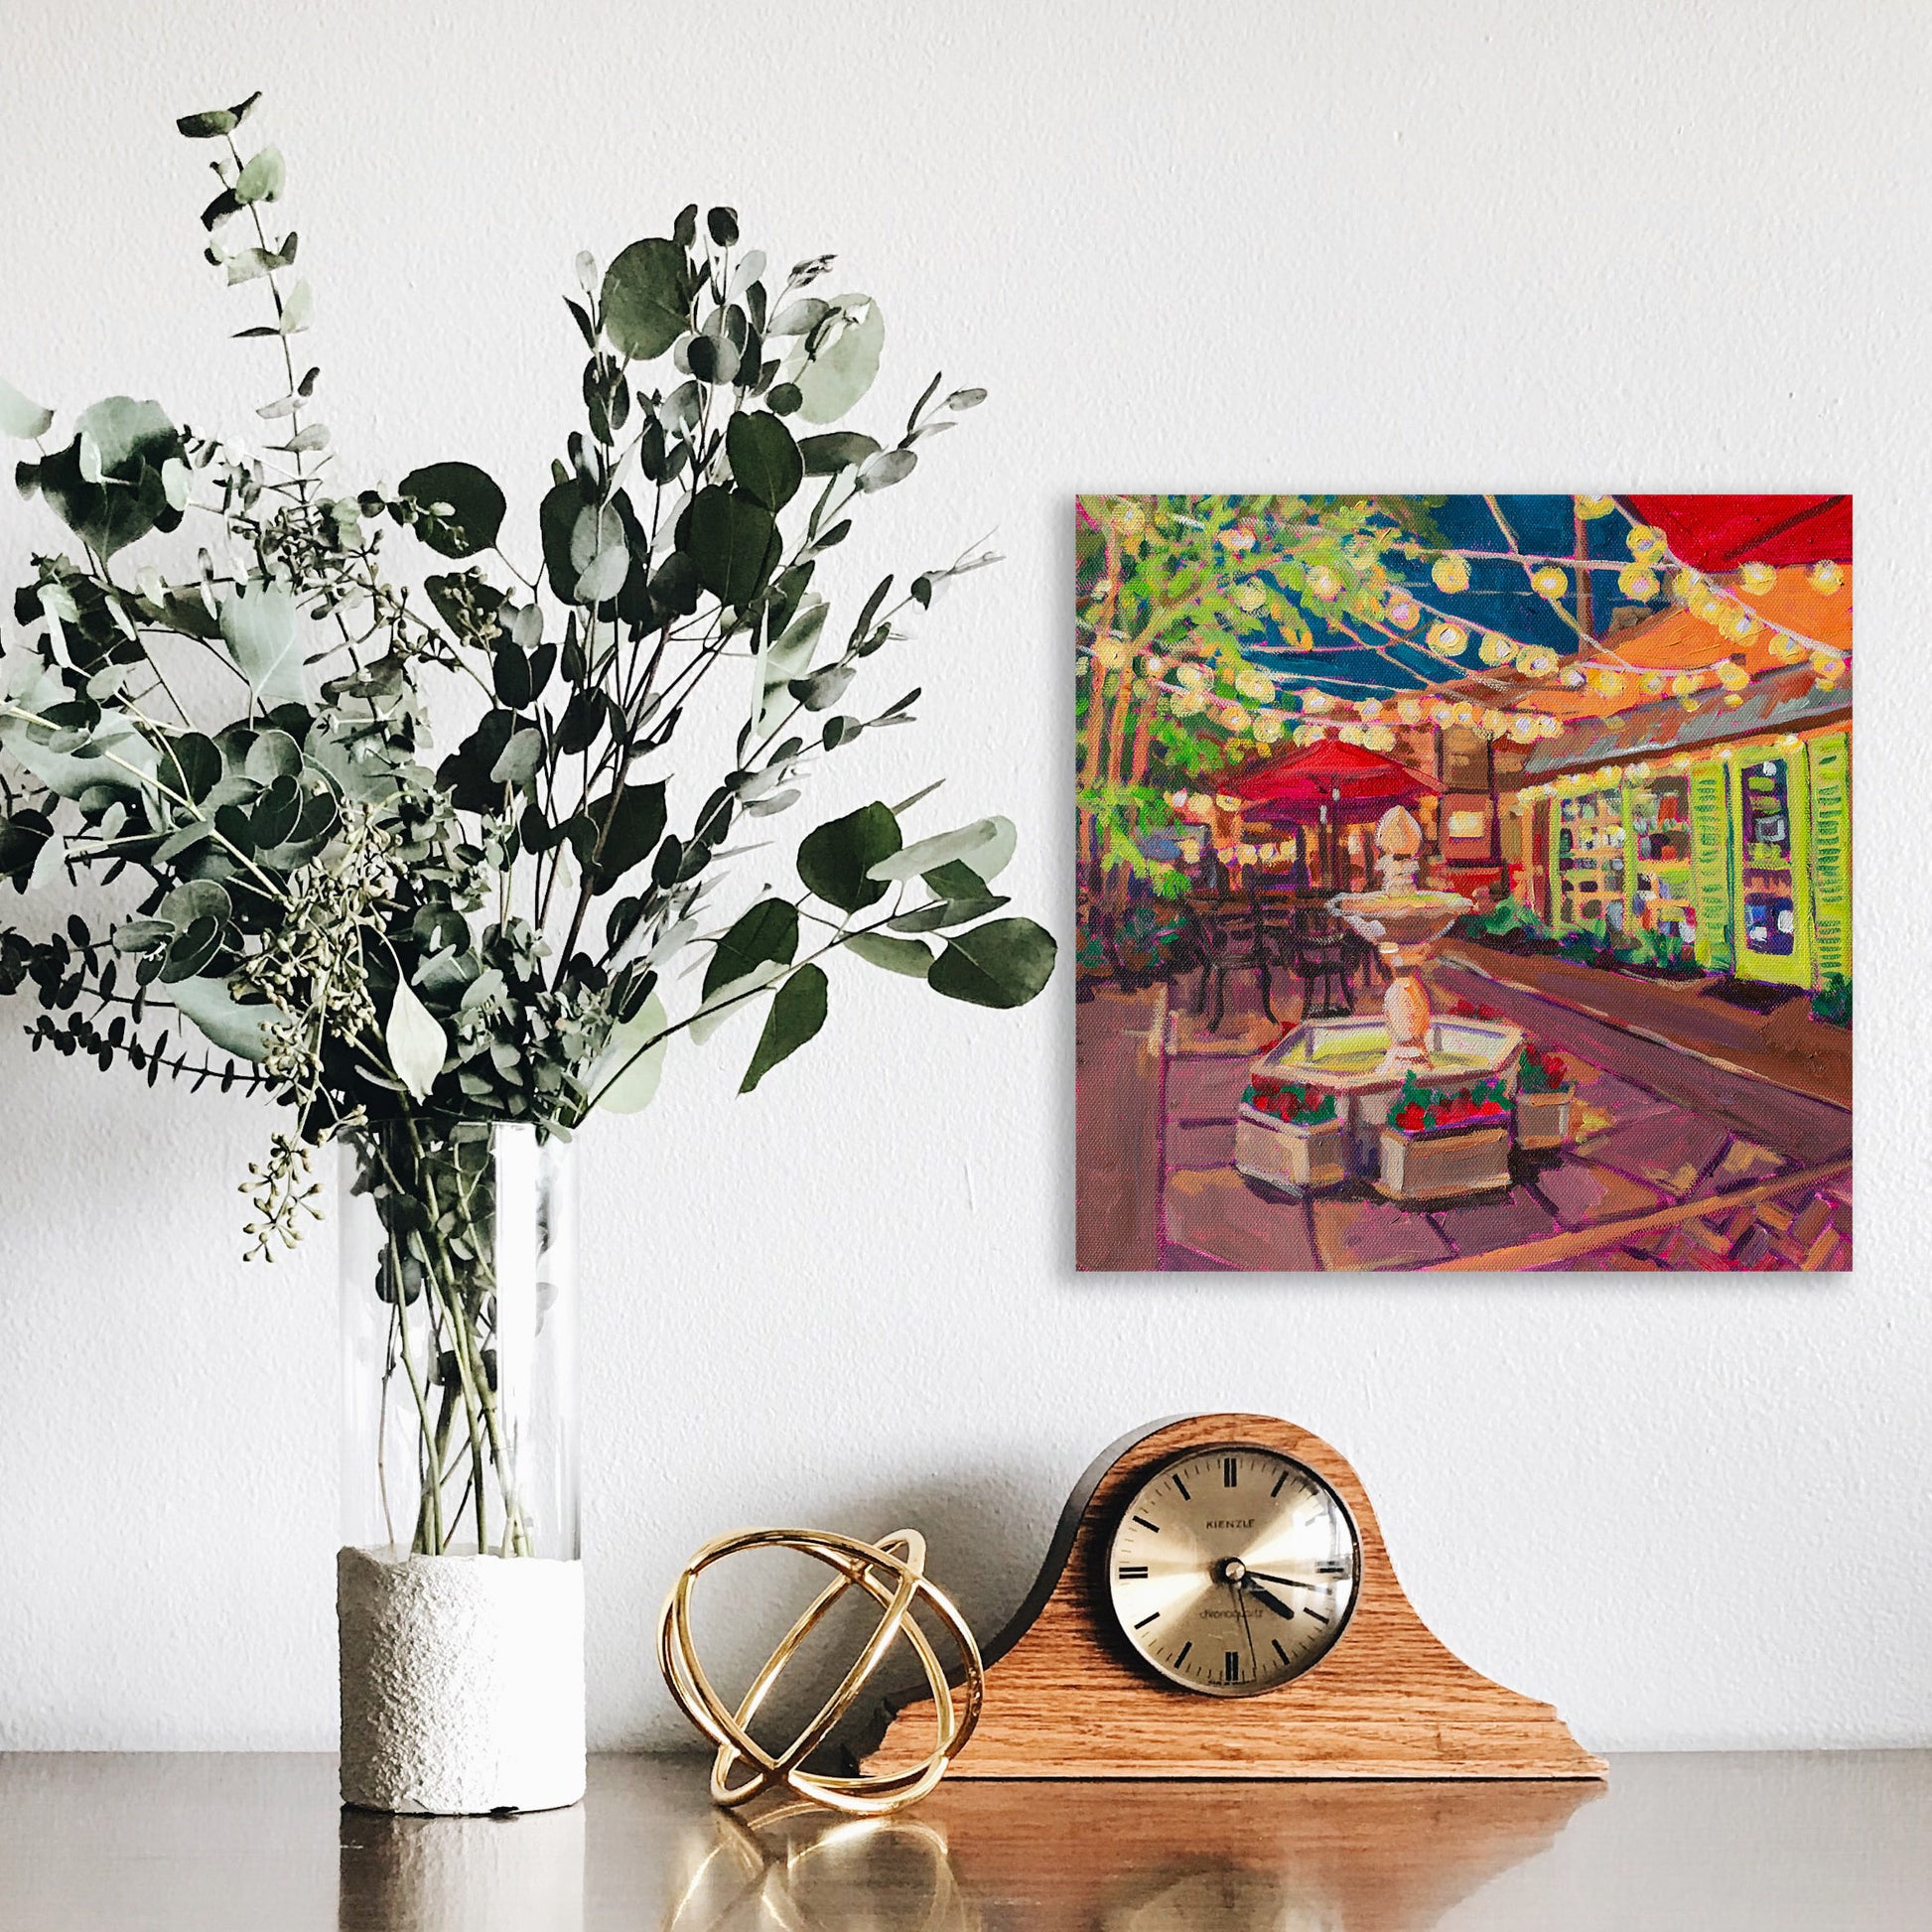 12x12 painting on wall behind dresser with vase and clock: Winter Park Nightlife 2 painting 12x12 vibrant hidden courtyard with strung lights, fountain and tables with umbrellas off Park Ave.